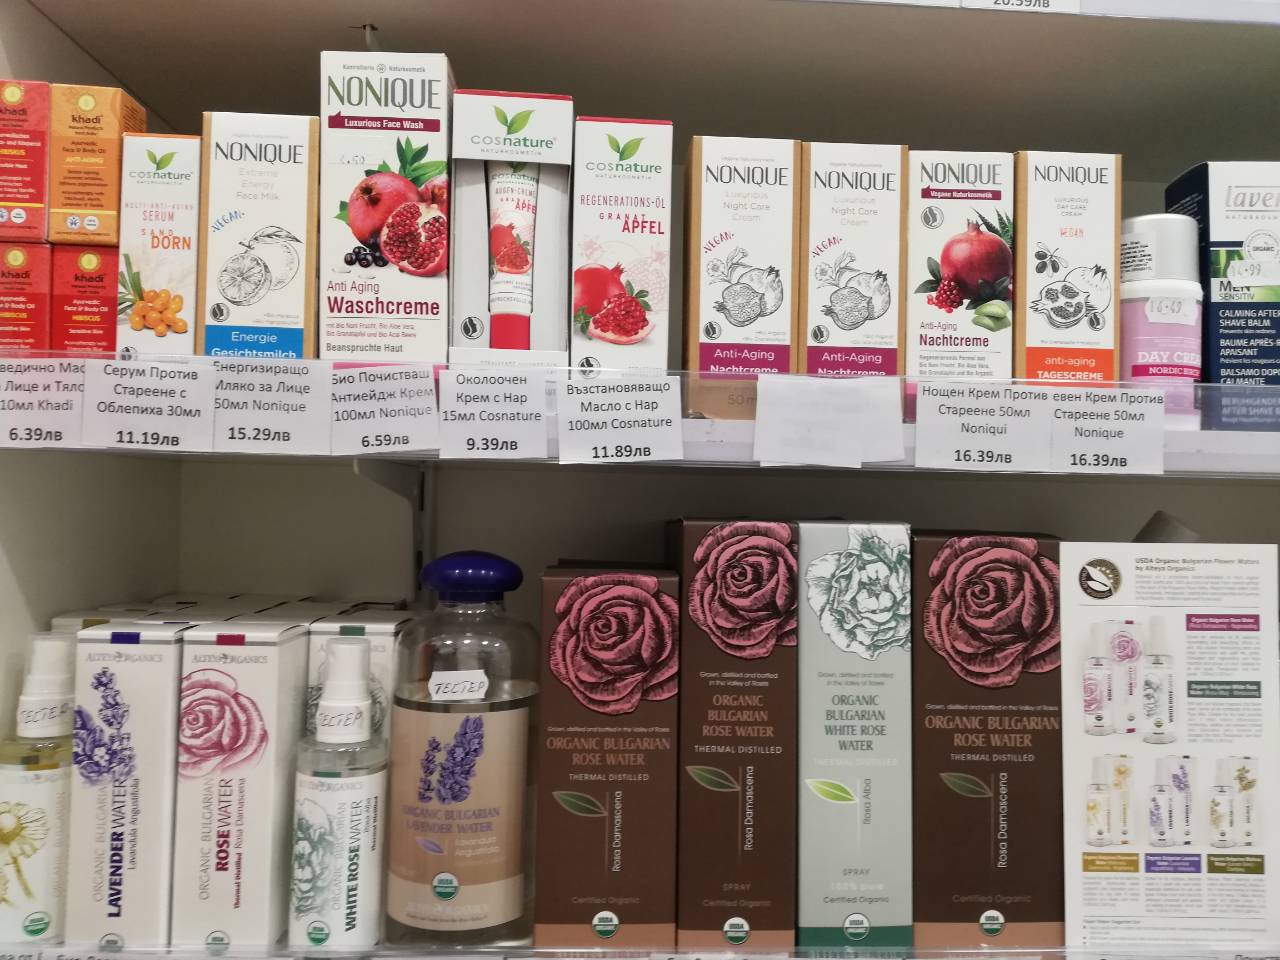 A shelf full of cosmetic products featuring rosa damascena and alteya extracts in a store.